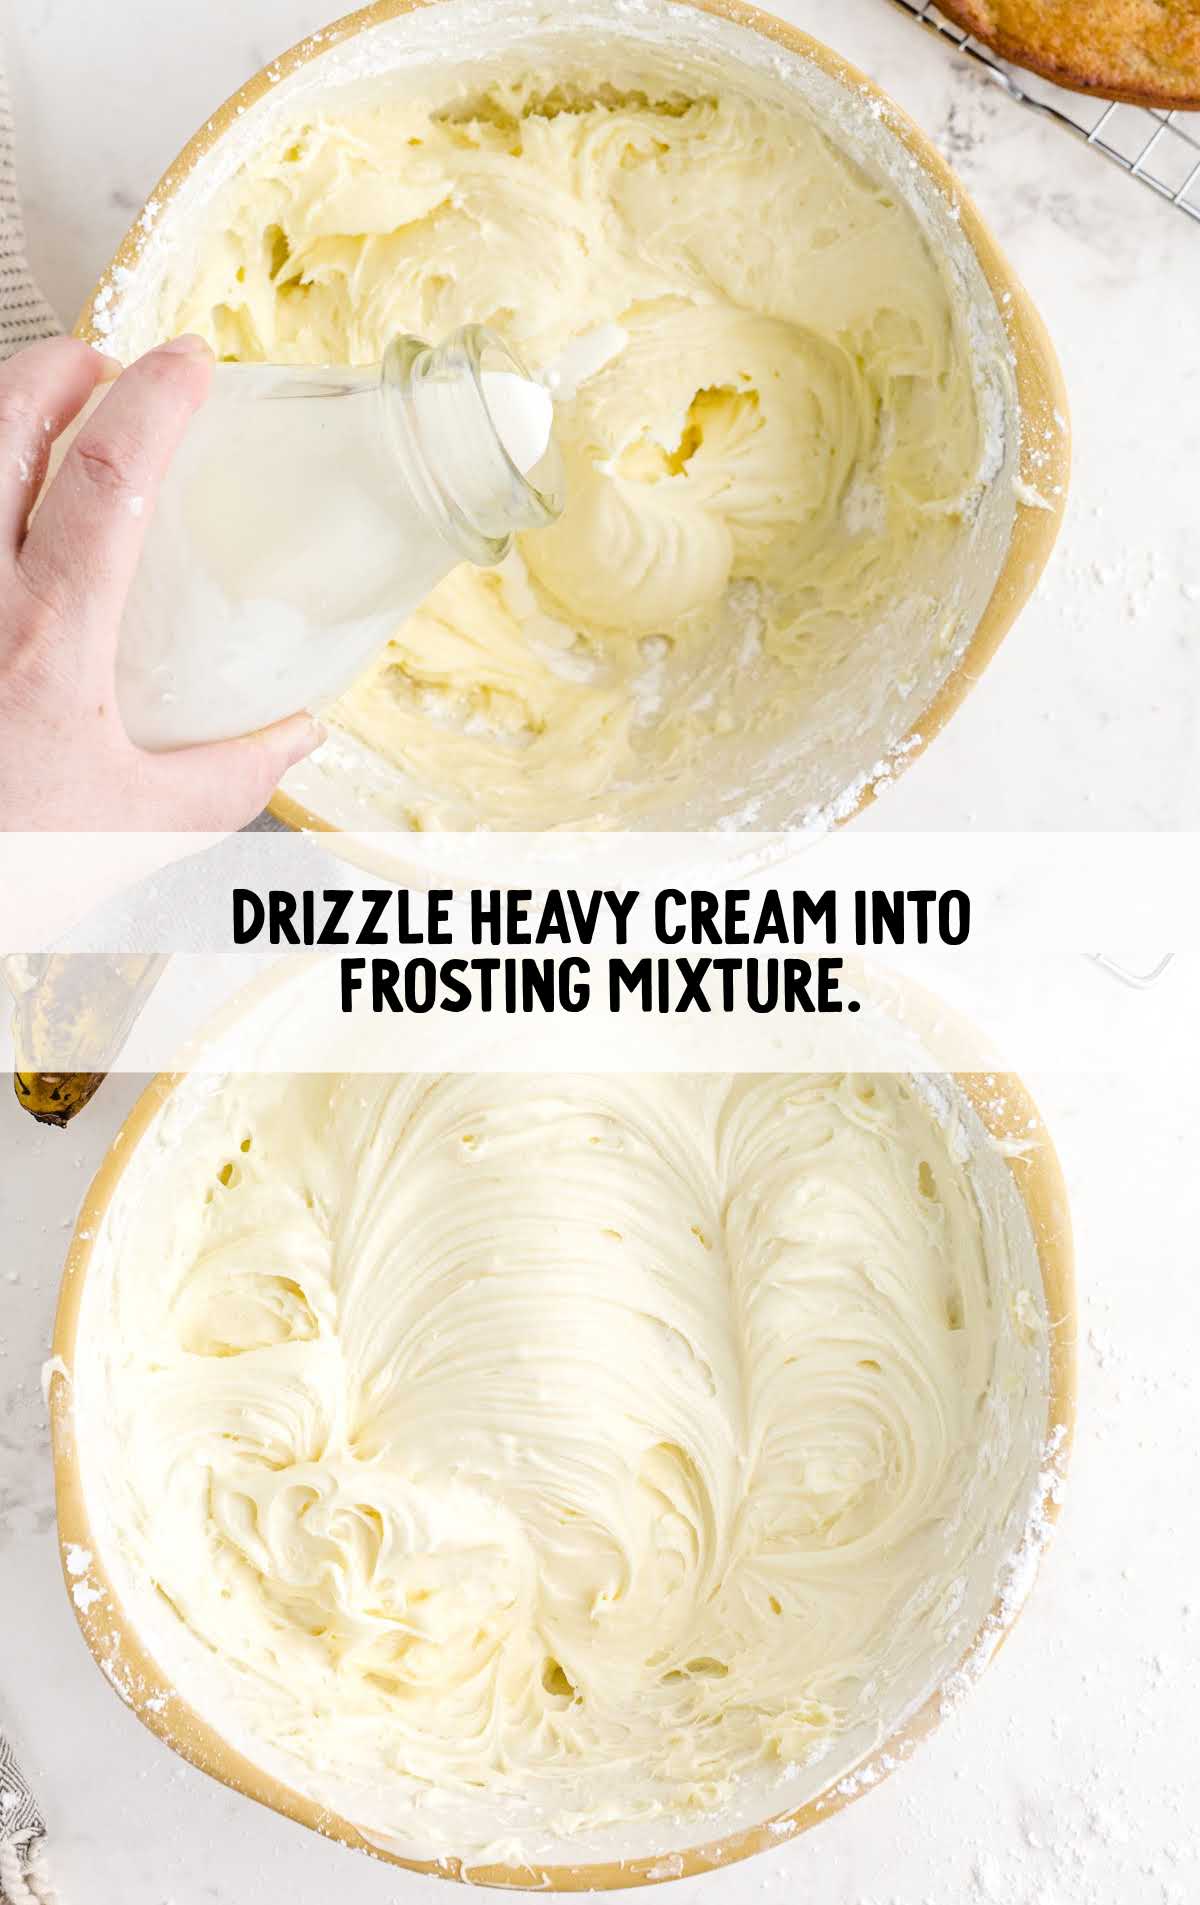 heavy cream drizzled into the frosting mixture in a bowl